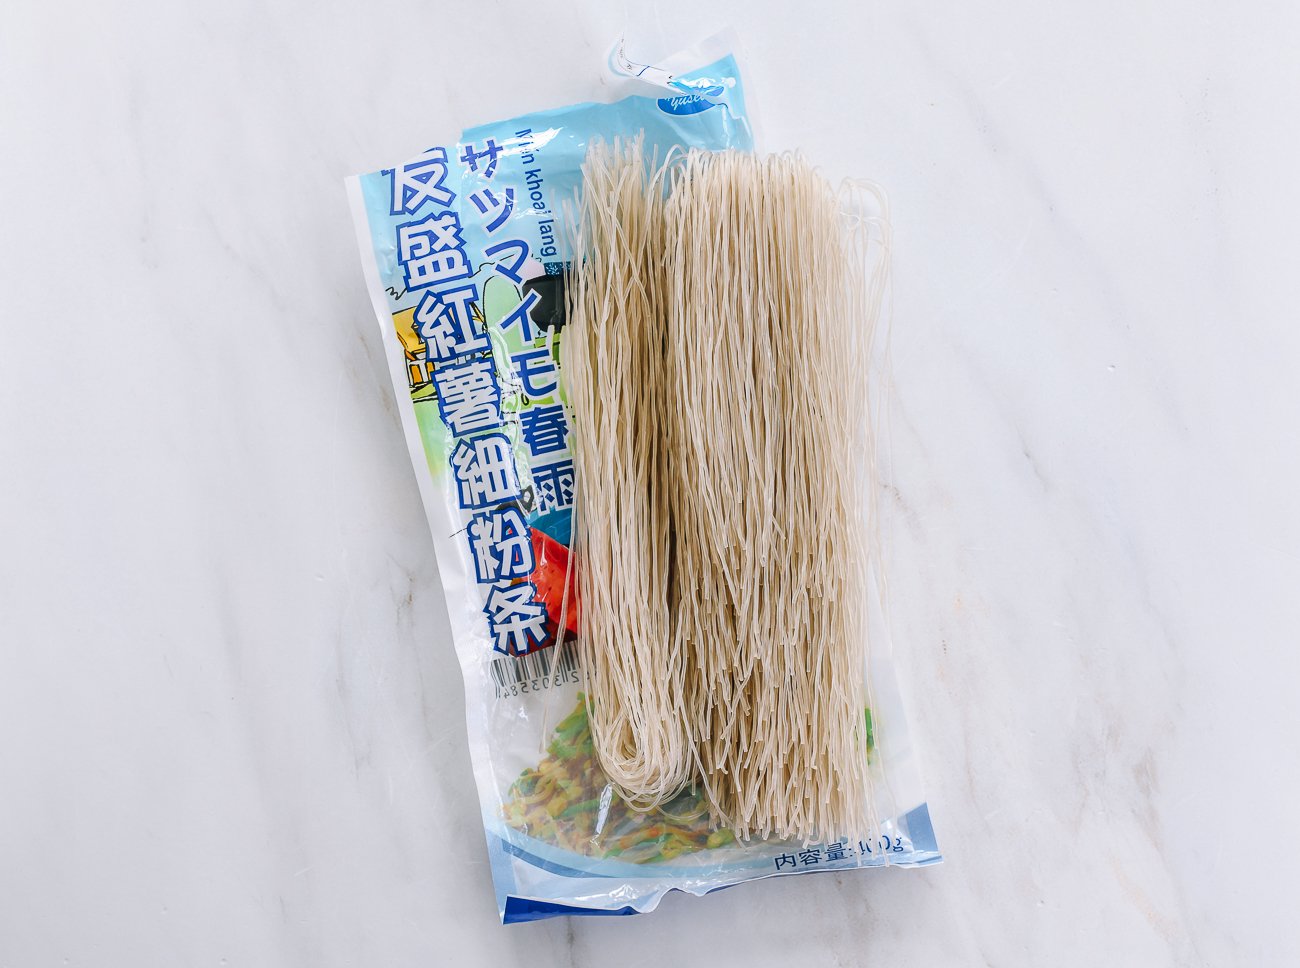 sweet potato noodles out of package